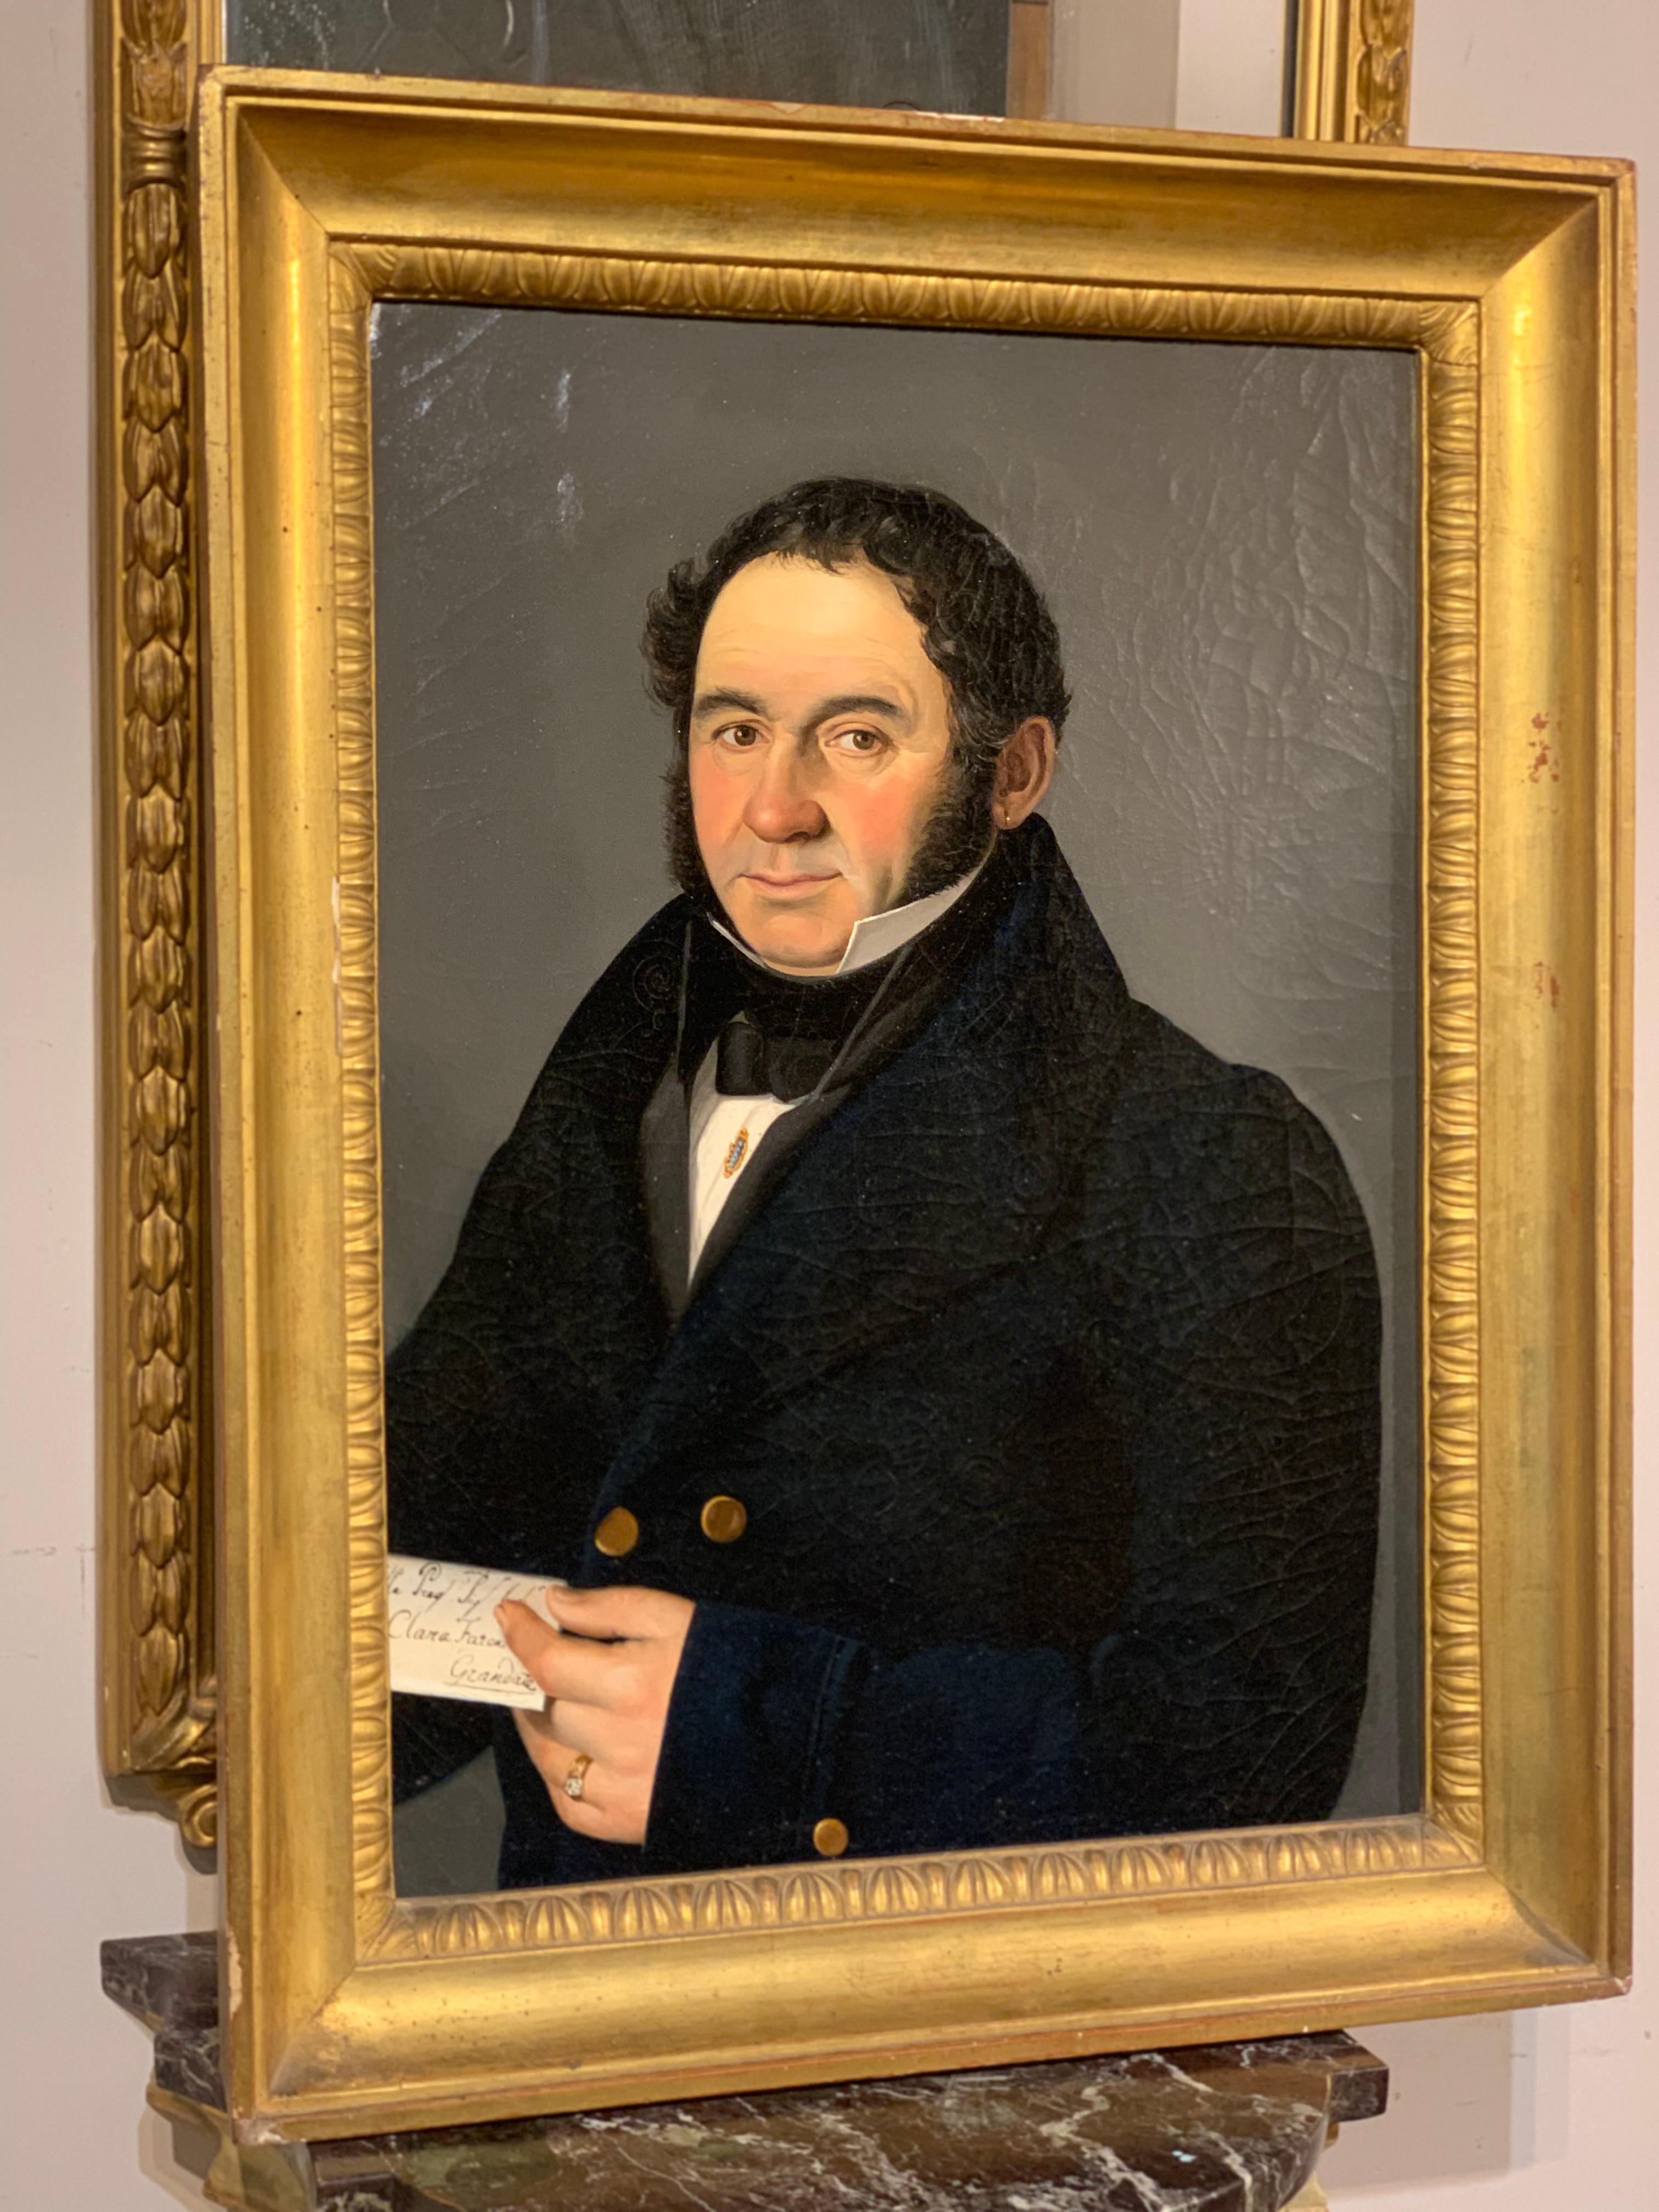 Beautiful portrait of a poet, oil painting on canvas in a coeval carved and gilded wooden frame.
In good condition.

MEASURES: Work cm 54x39, Overall cm 67x52.